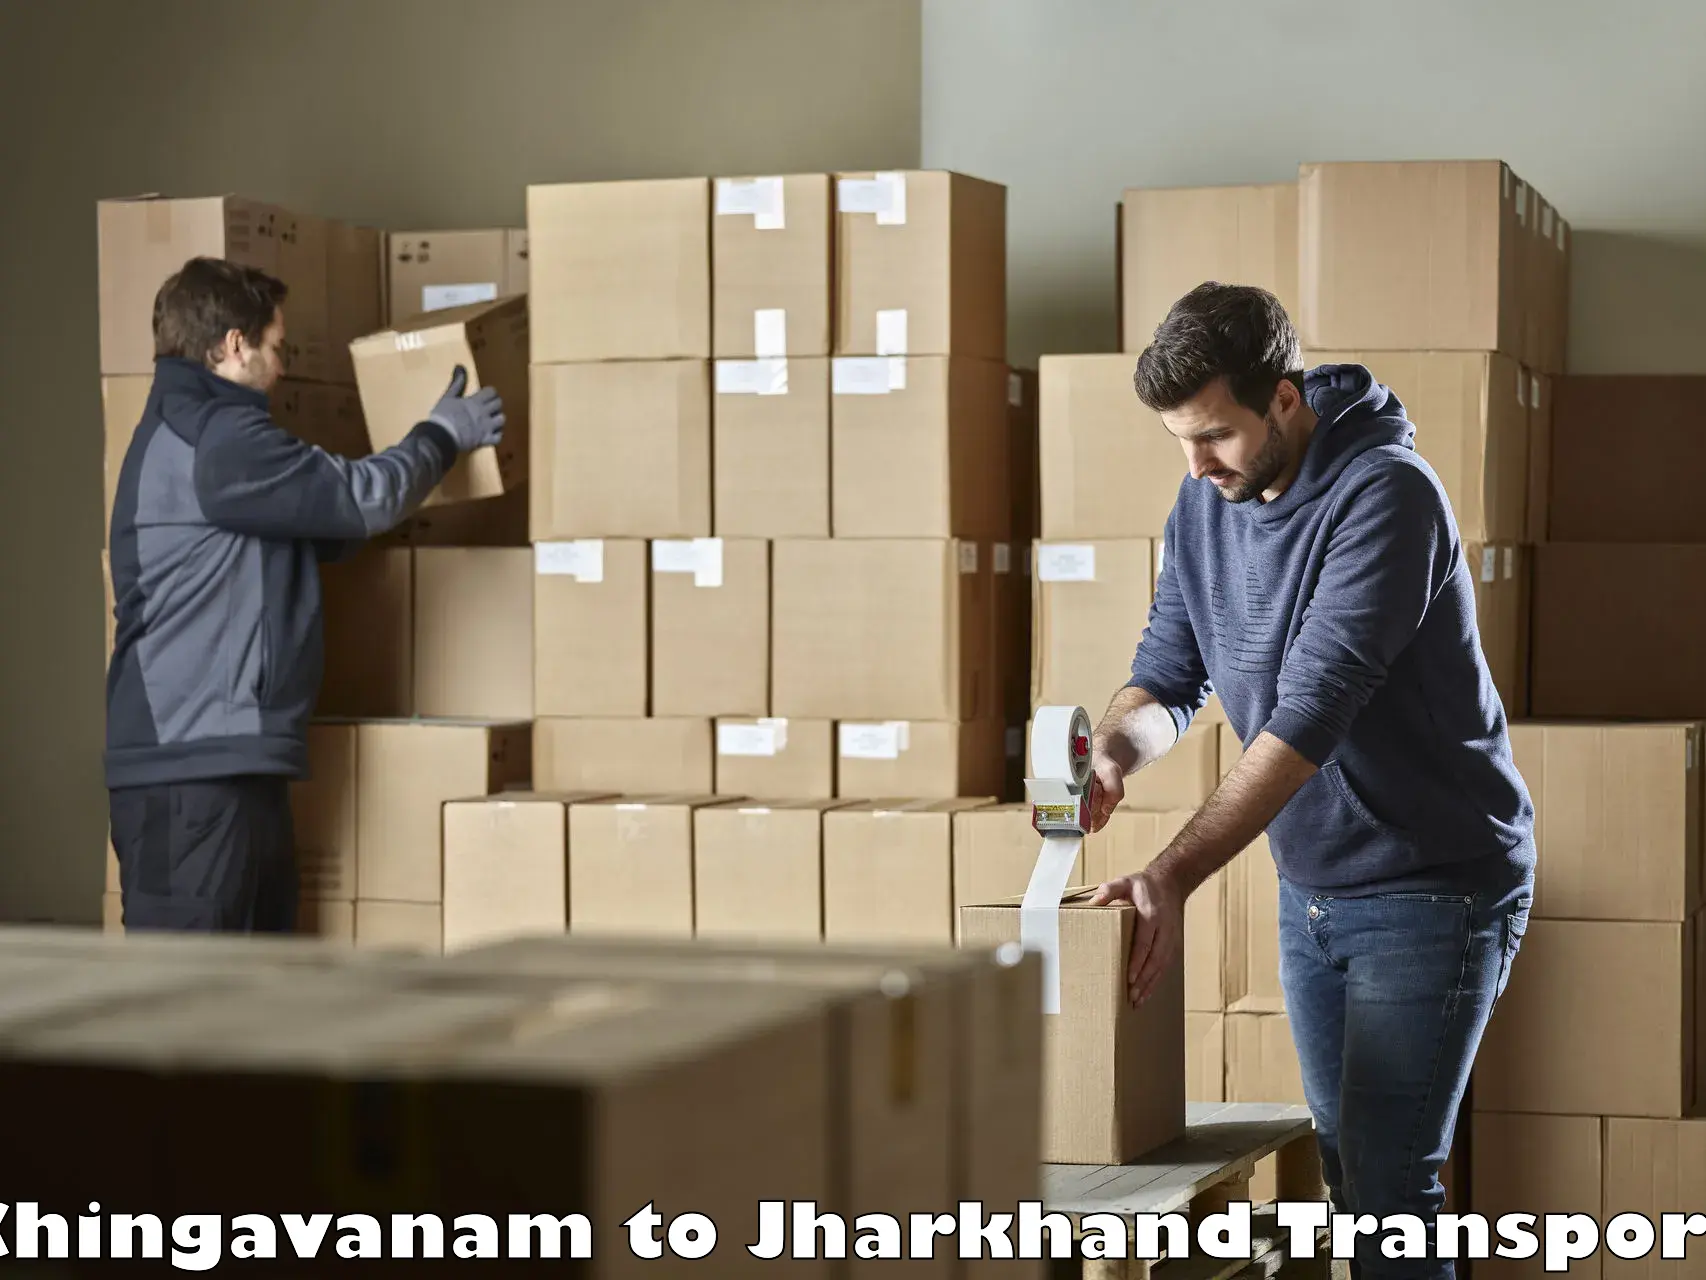 Air freight transport services Chingavanam to Dhanbad